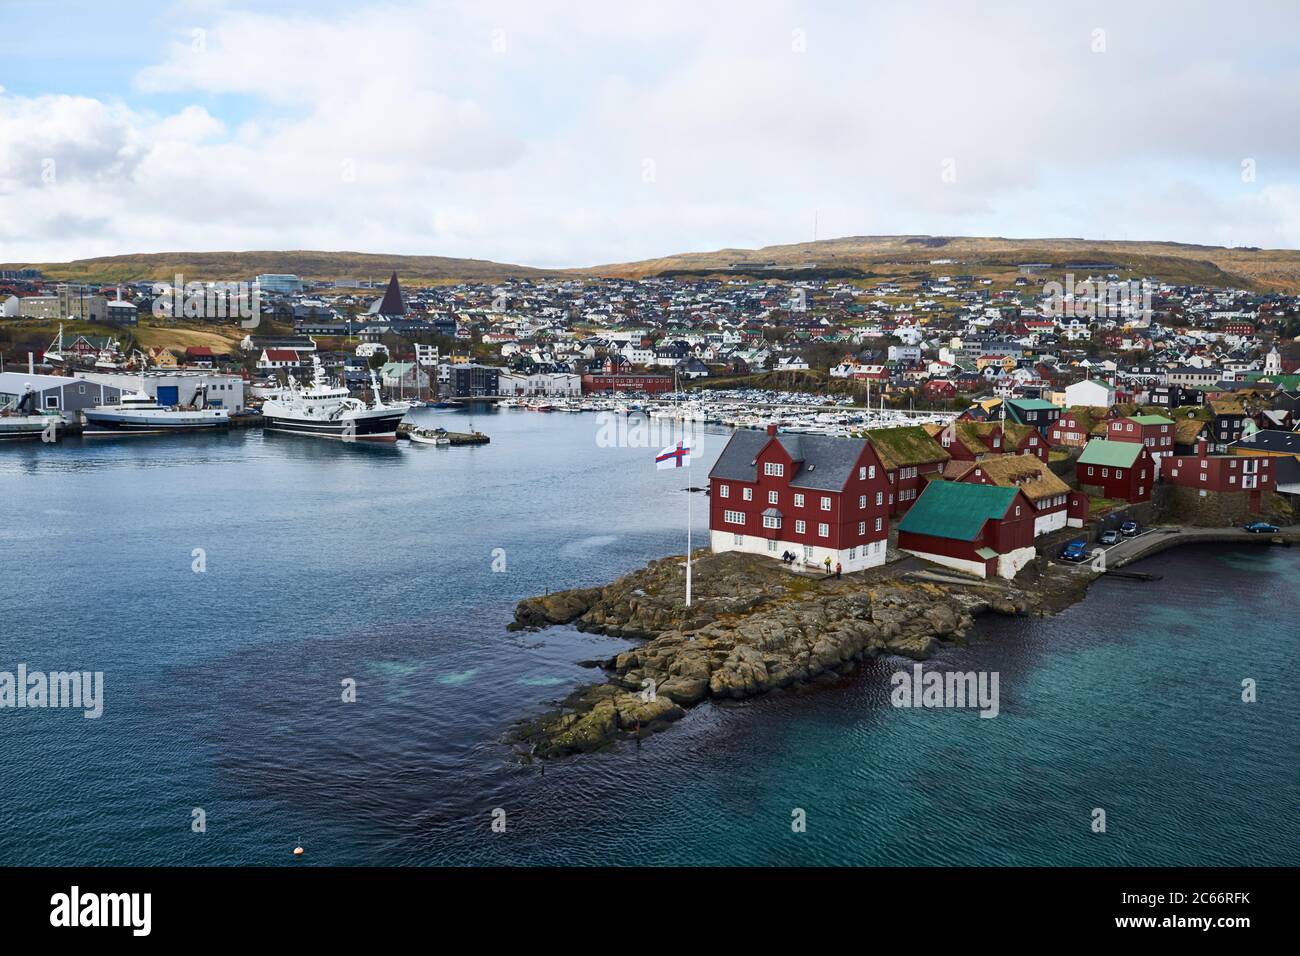 Faroe Islands, View of little Harbour Town, snowcapped mountain in the background Stock Photo